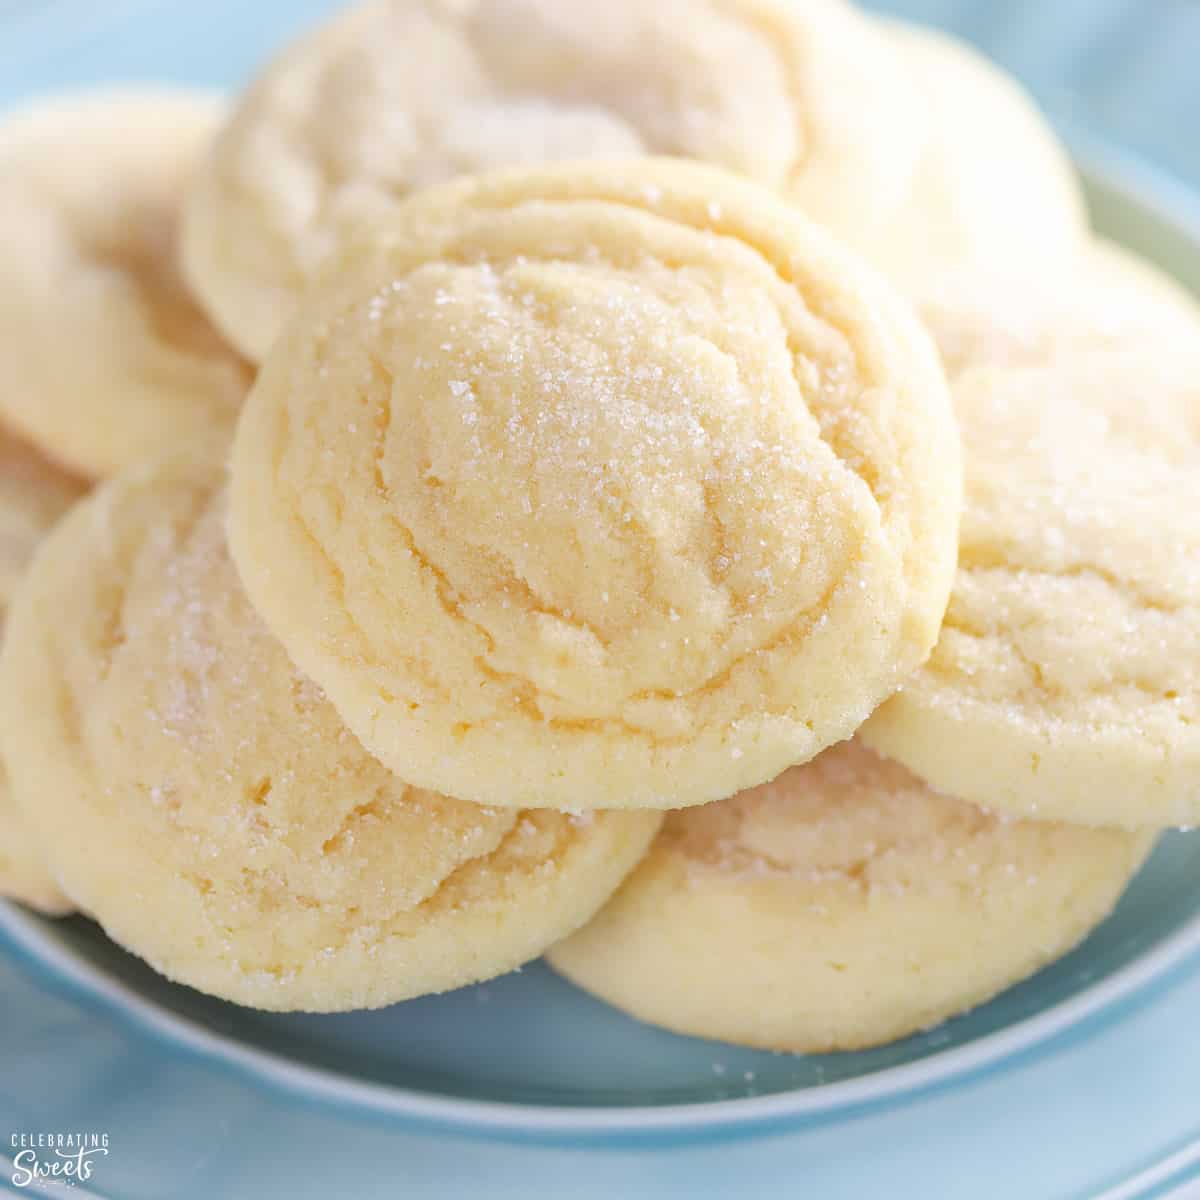 How To Cook Sugar Cookies - Bathmost9